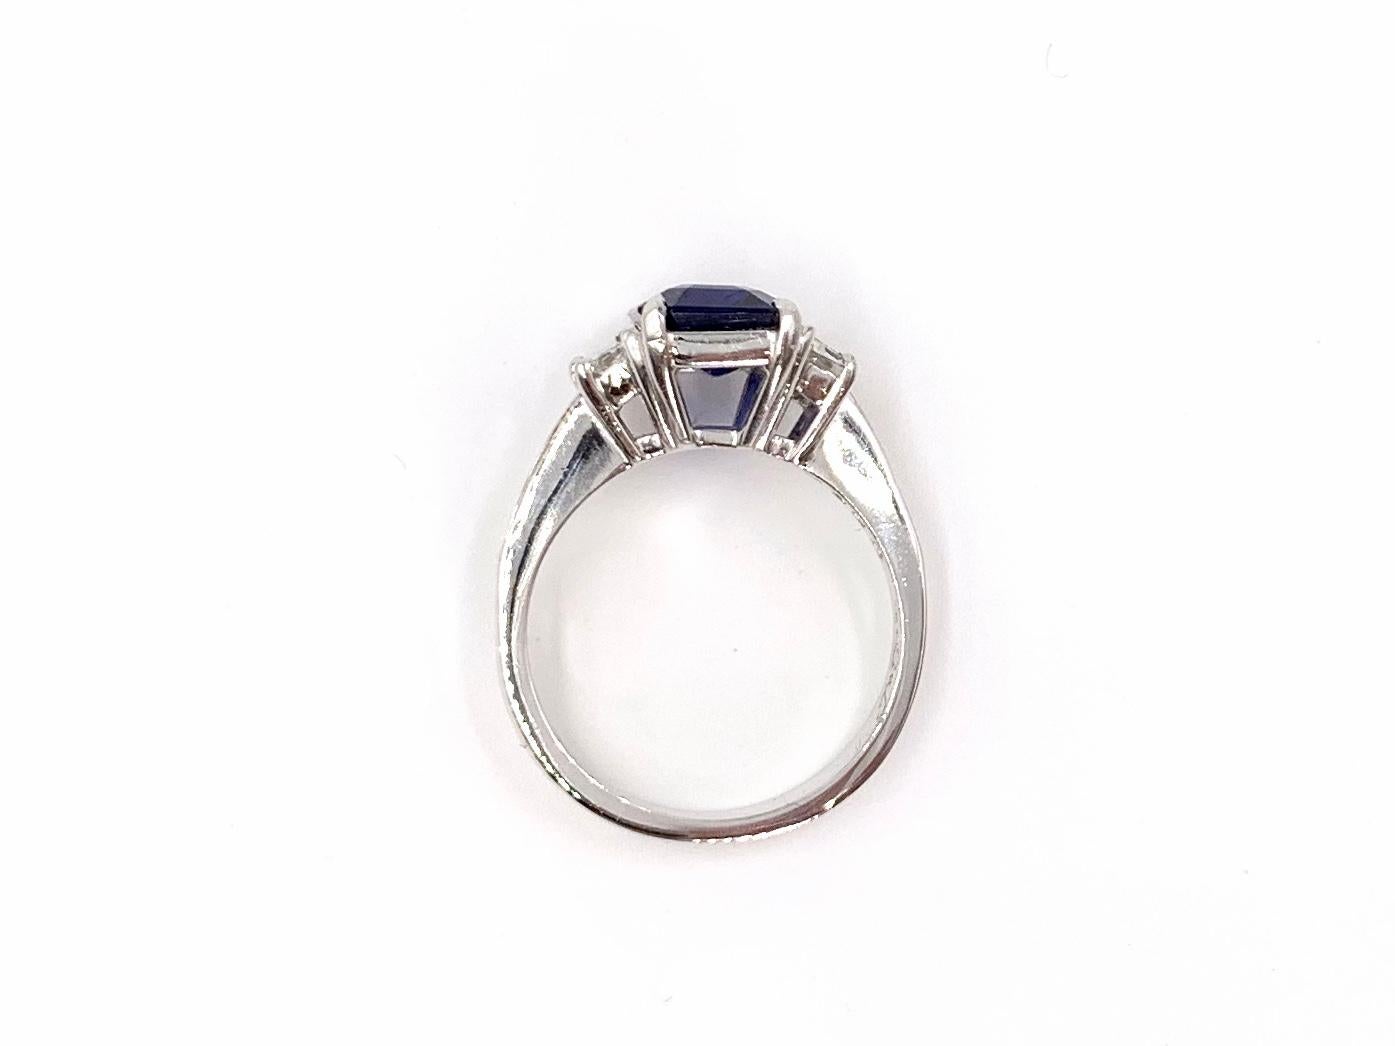 A classic and elegantly designed platinum ring by JB Star featuring a vivid, well saturated 3.22 emerald cut royal blue sapphire beautifully flanked by step-cut trapezoids and baguettes. Sapphire is of a very fine color and make with medium